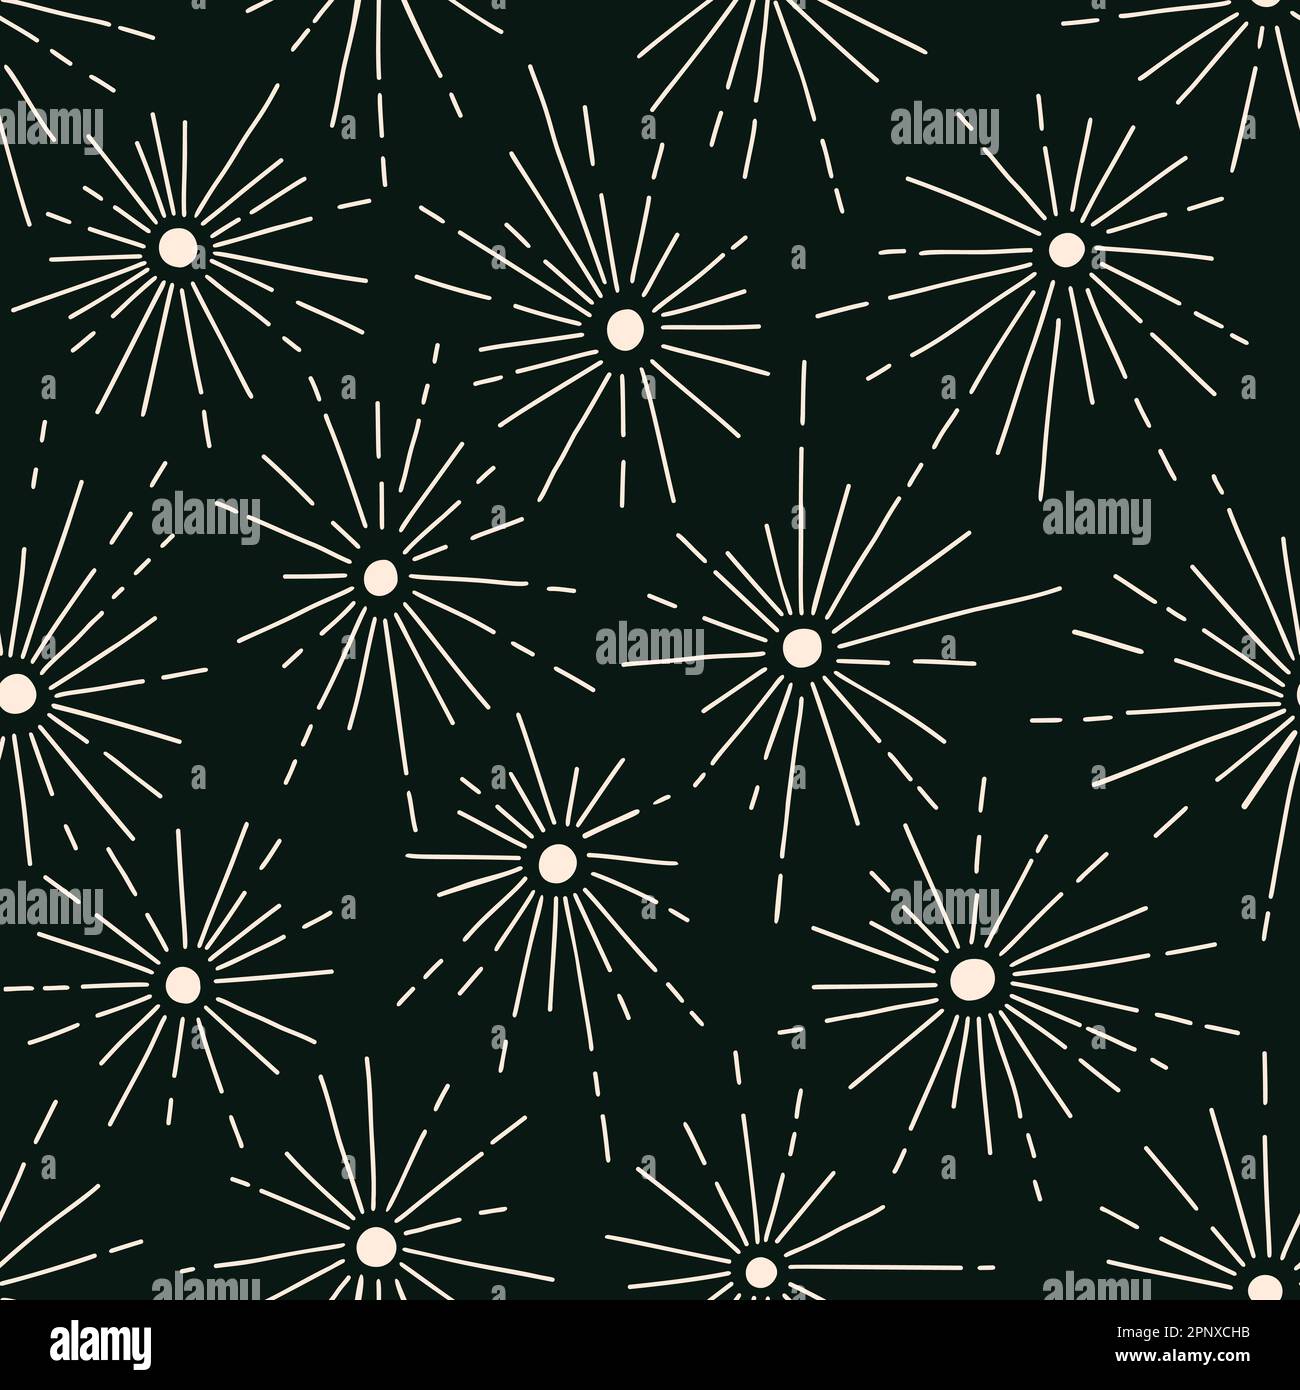 Hand Drawn Star and Fireworks Vector Seamless Pattern Stock Vector